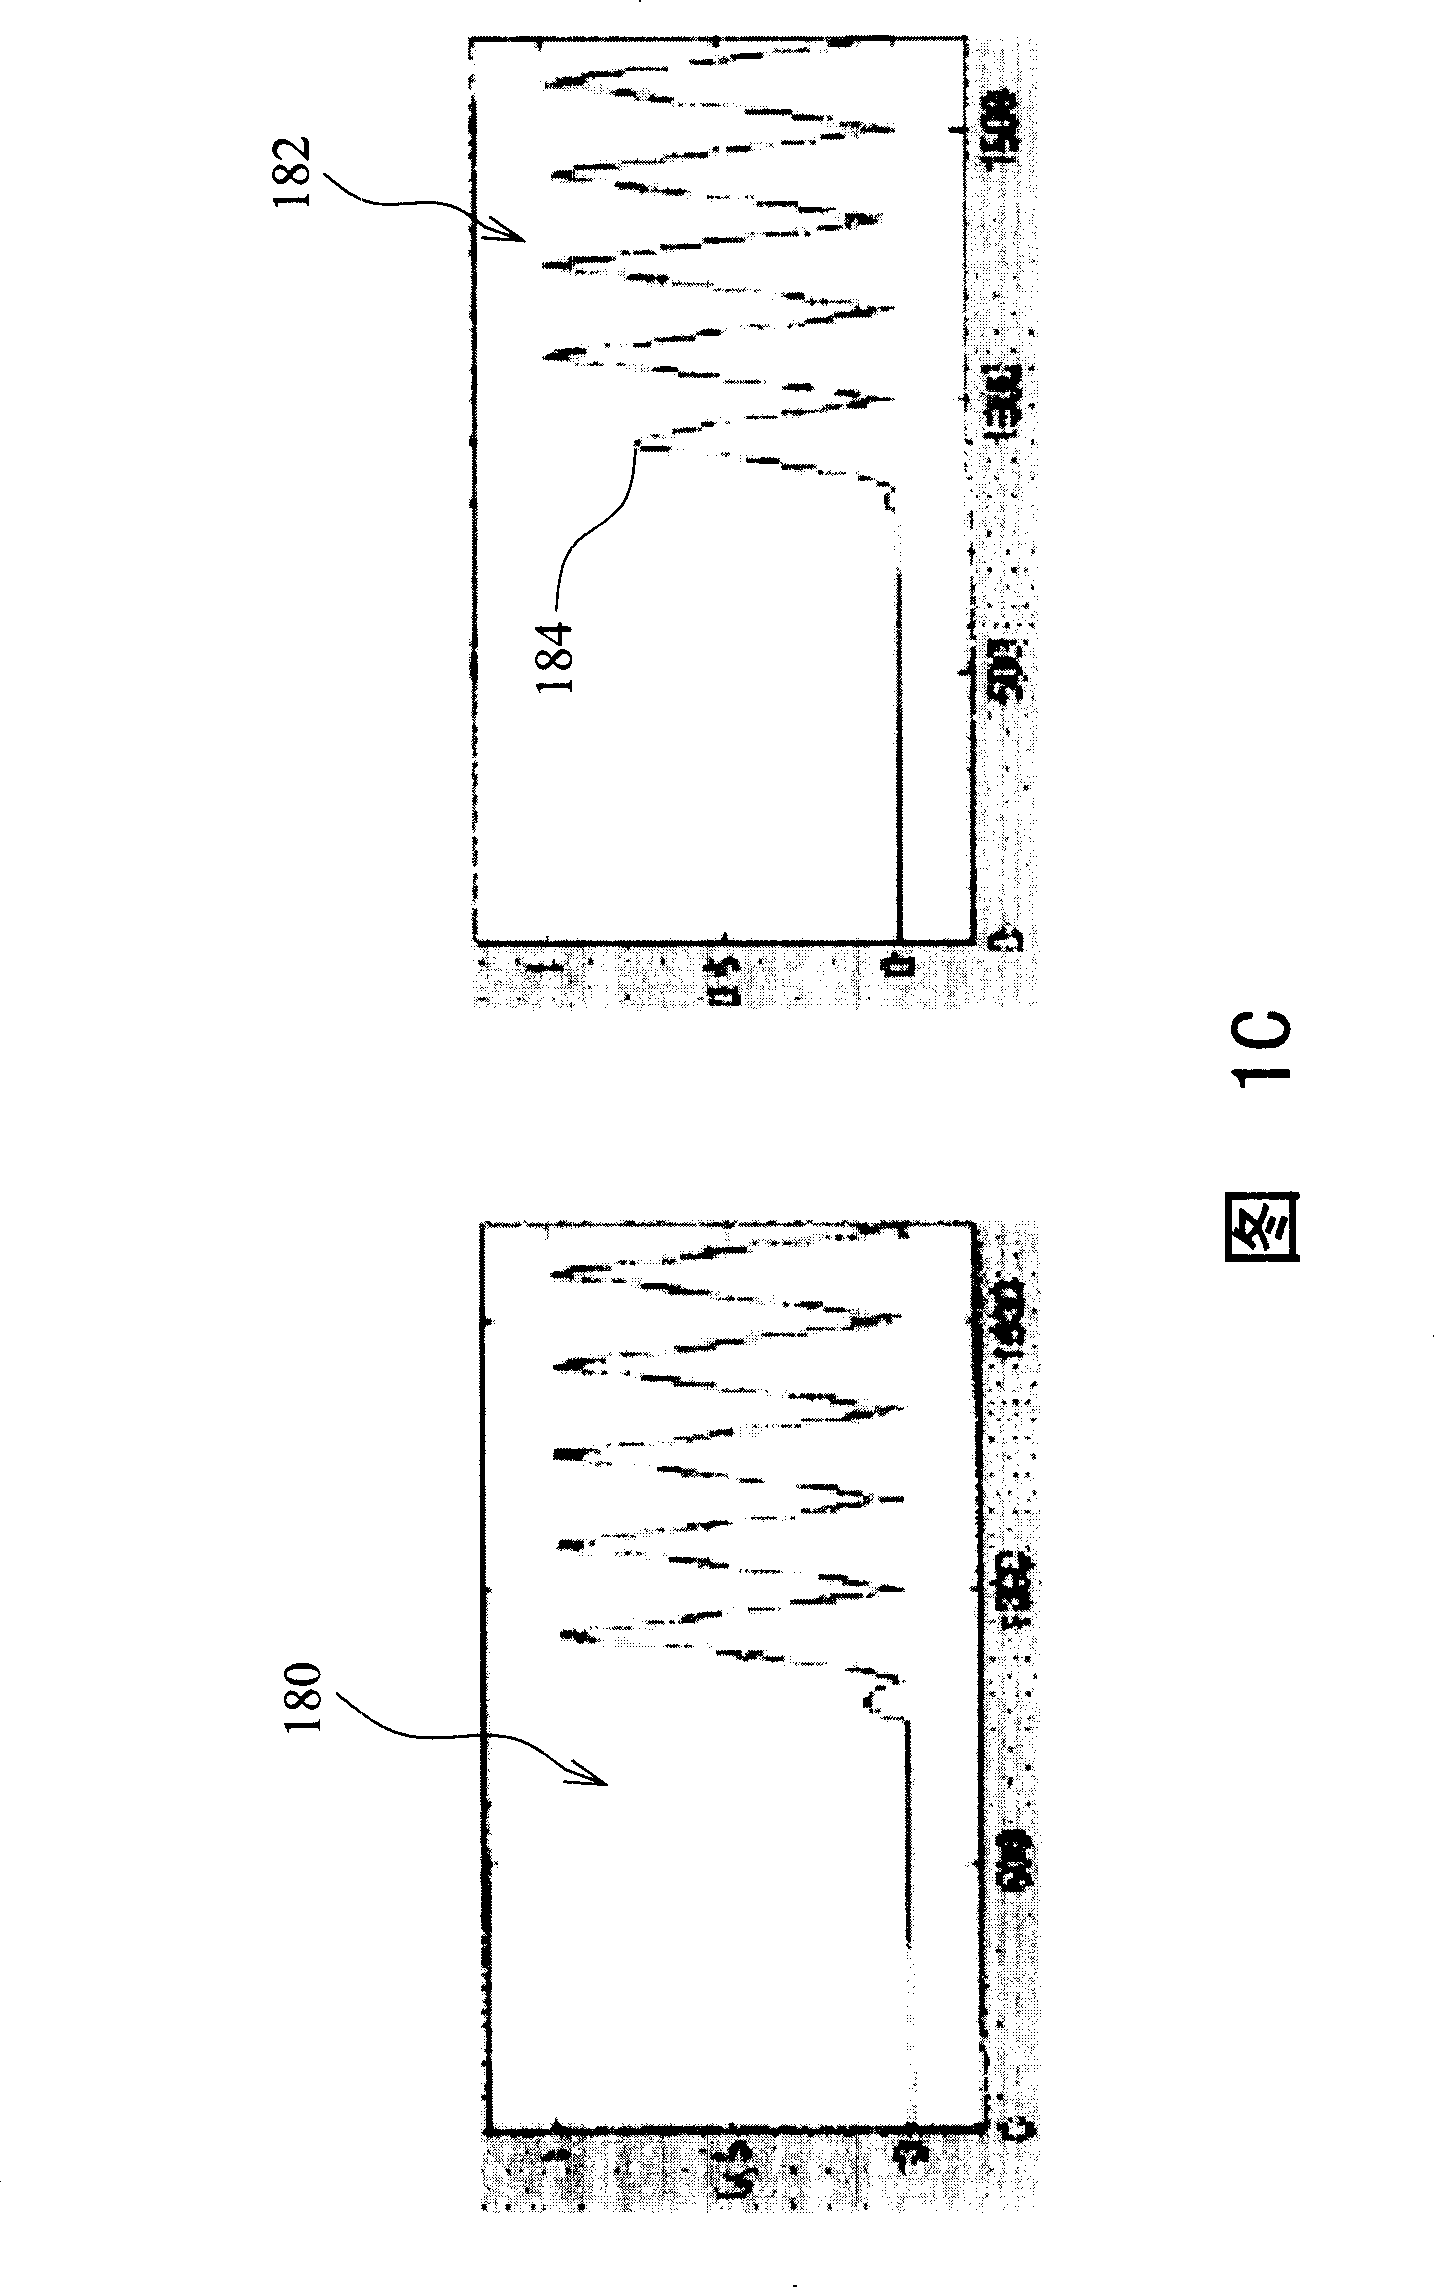 Display system and method for improving image display quality thereof